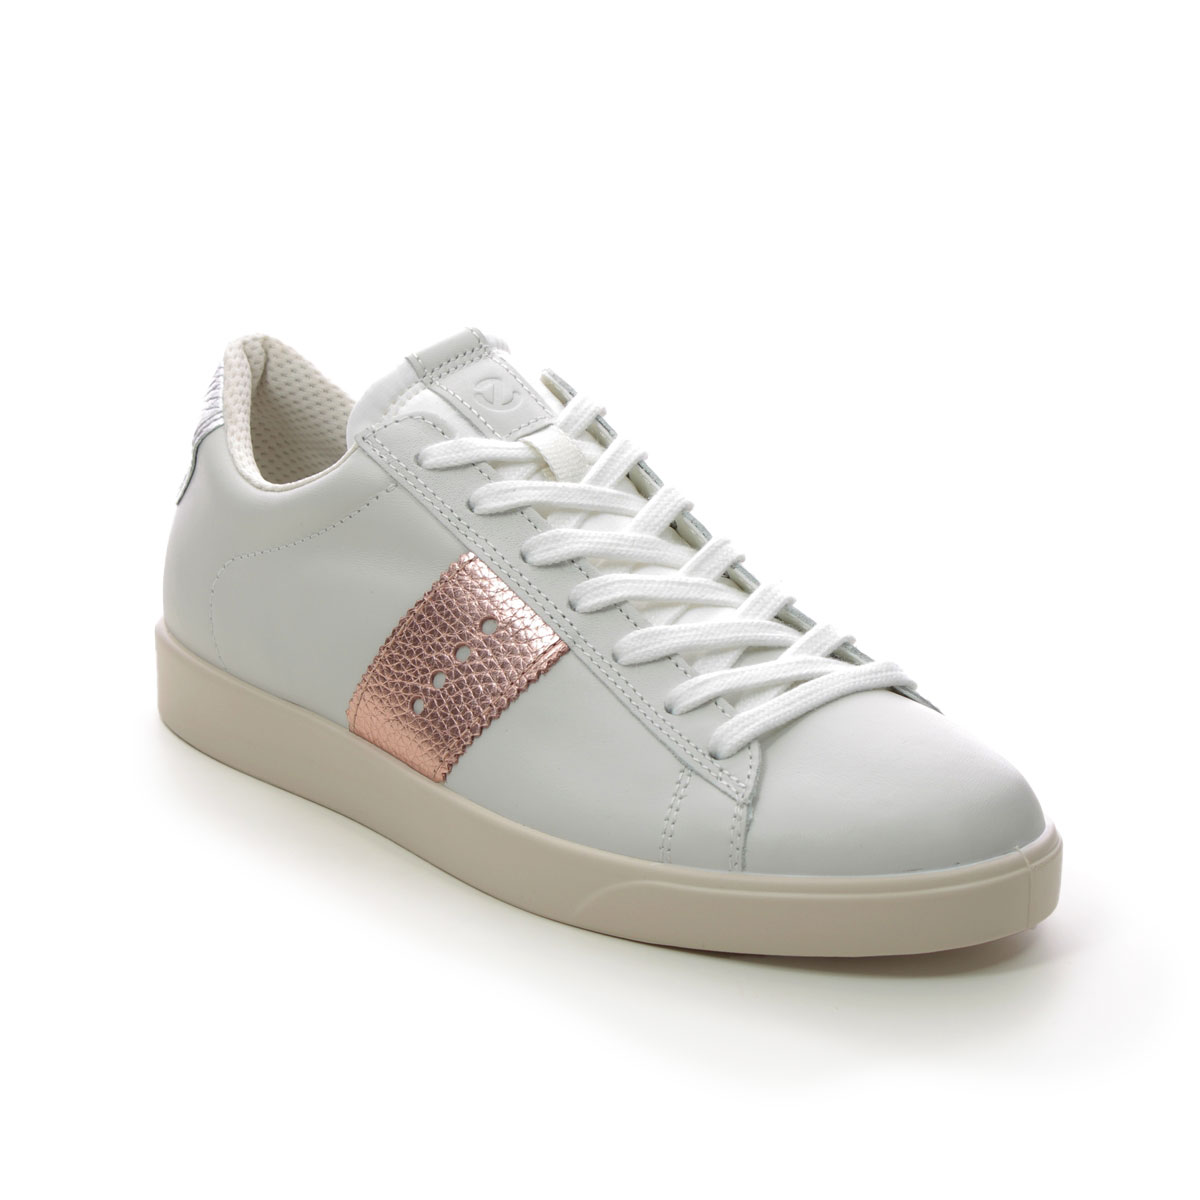 Ecco Street Lite Womens White Rose Gold Womens Trainers 212803-60717 In Size 41 In Plain White Rose Gold